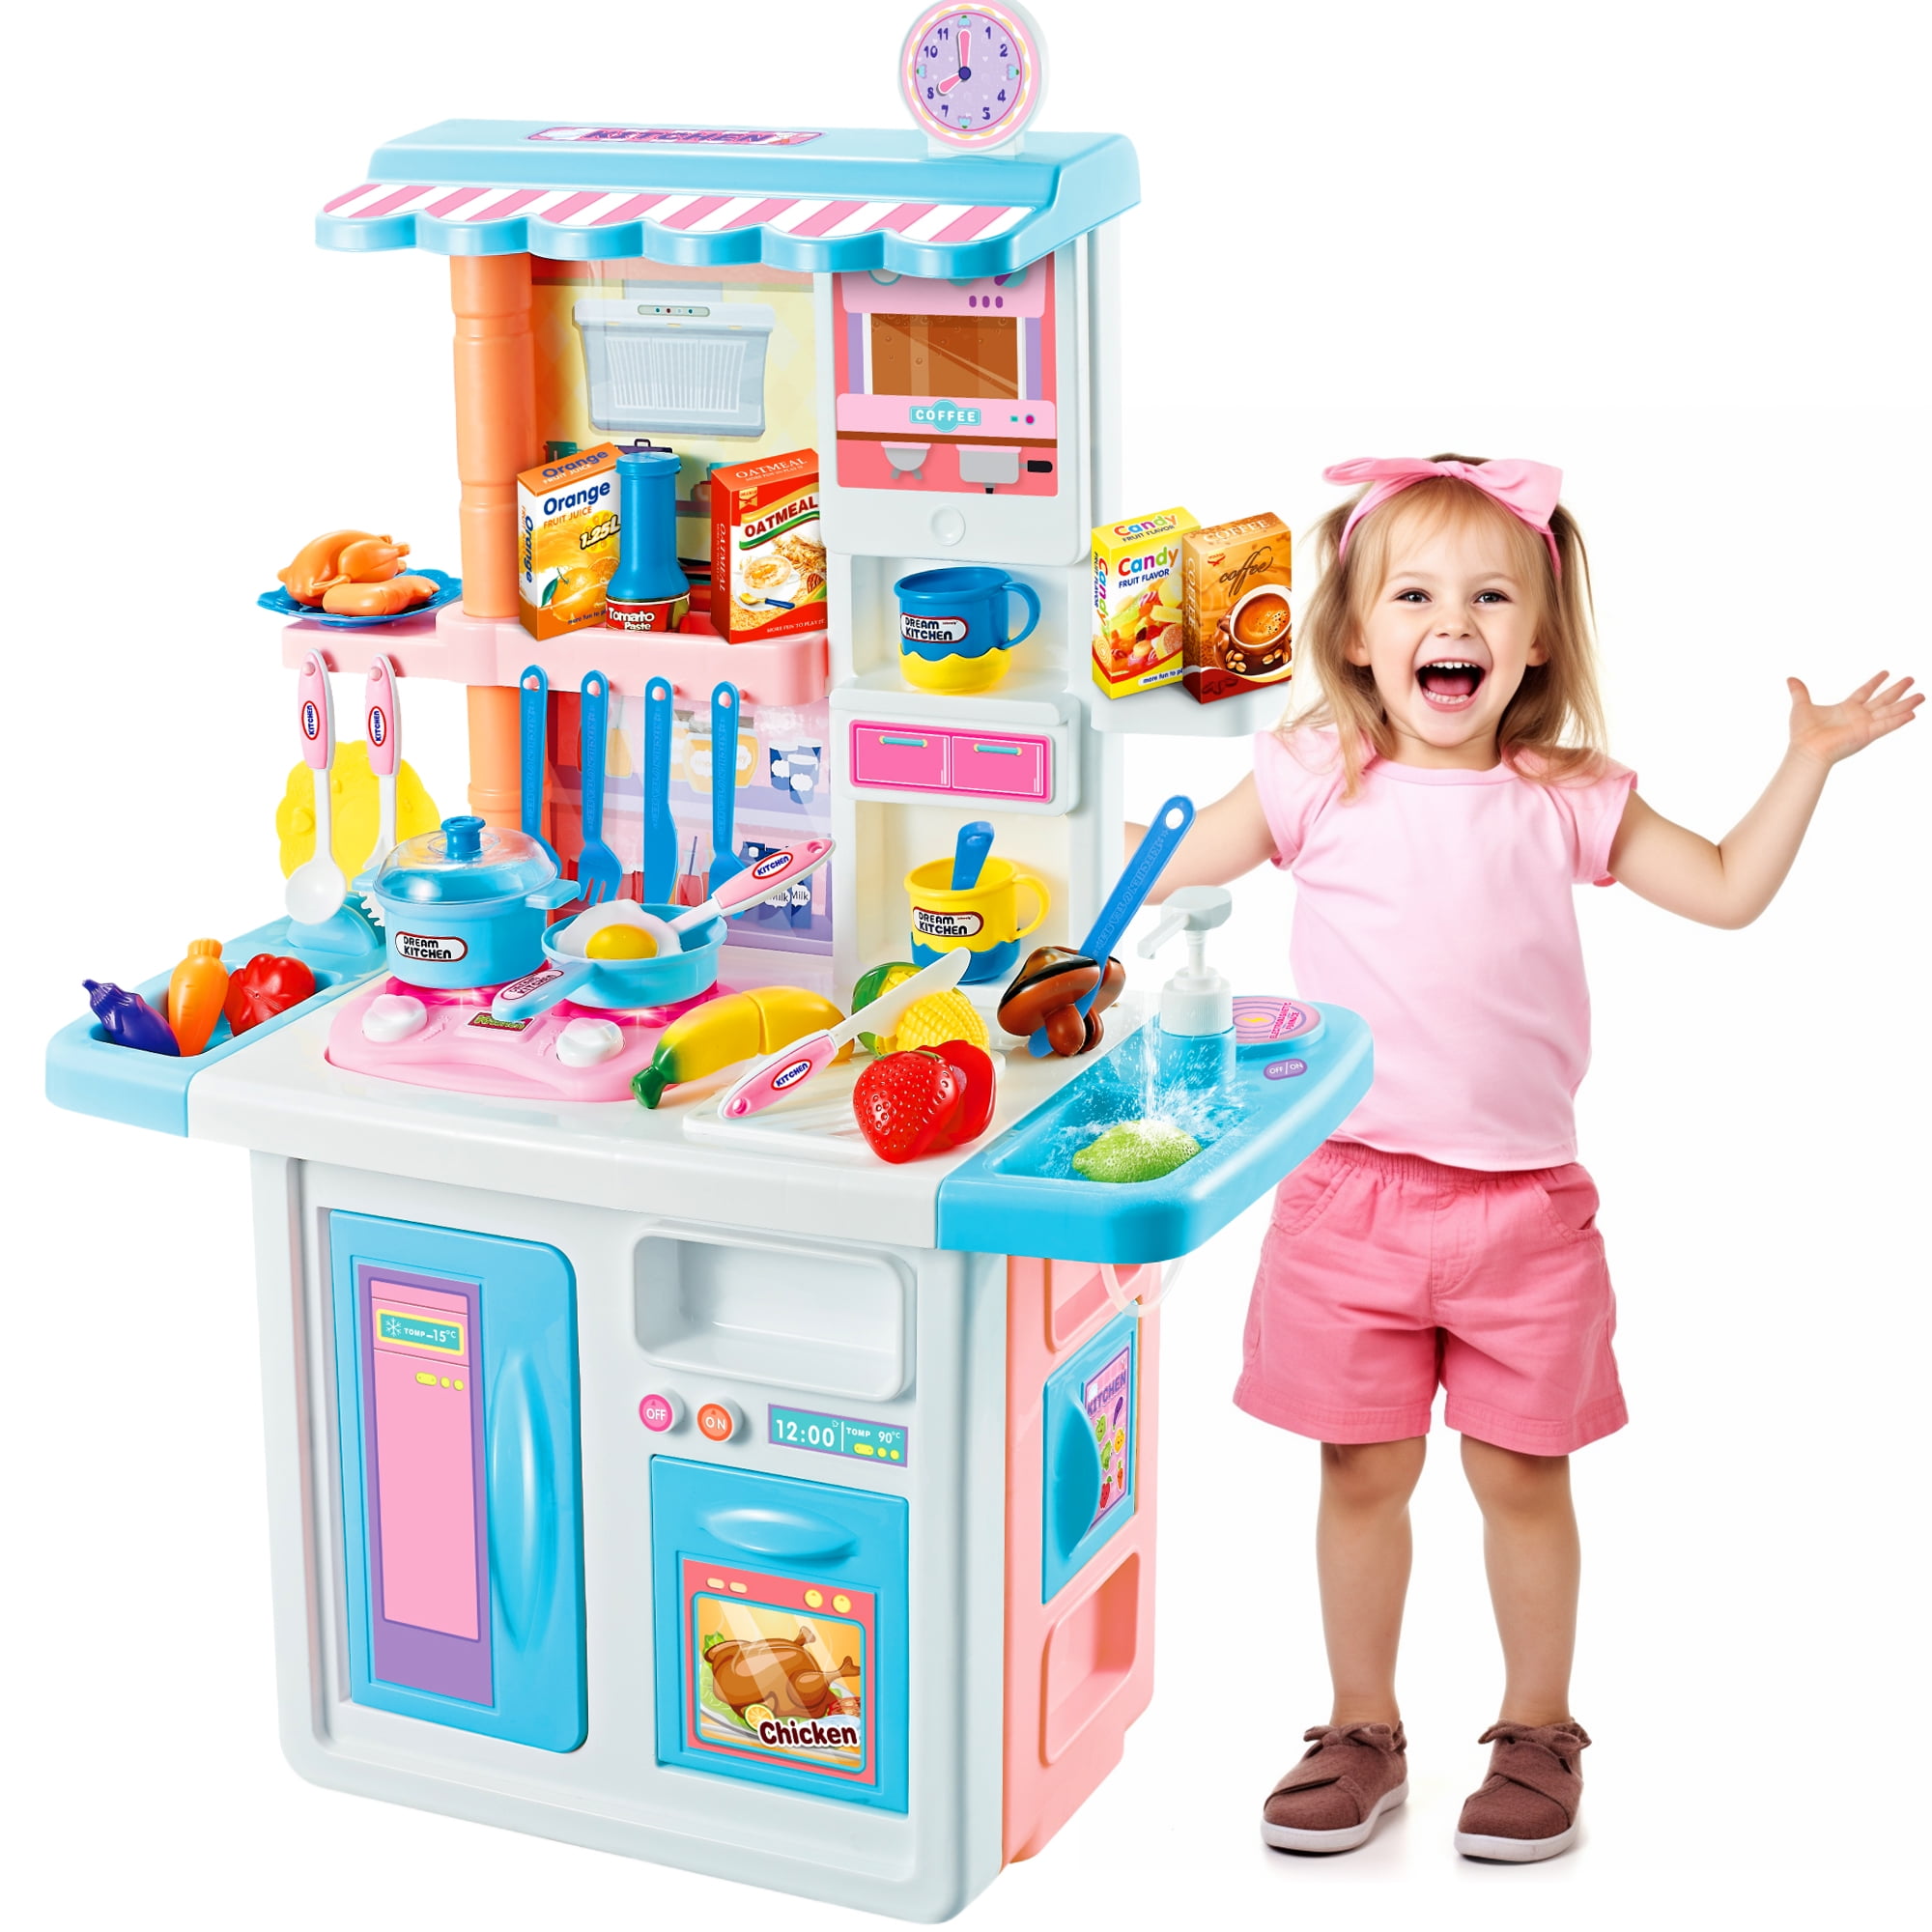 Dropship Modern Style Toy Kitchen Set For Boys& Girls 3+, Great Gift For  Christmas, Party, Birthday(Blue & Gold) to Sell Online at a Lower Price